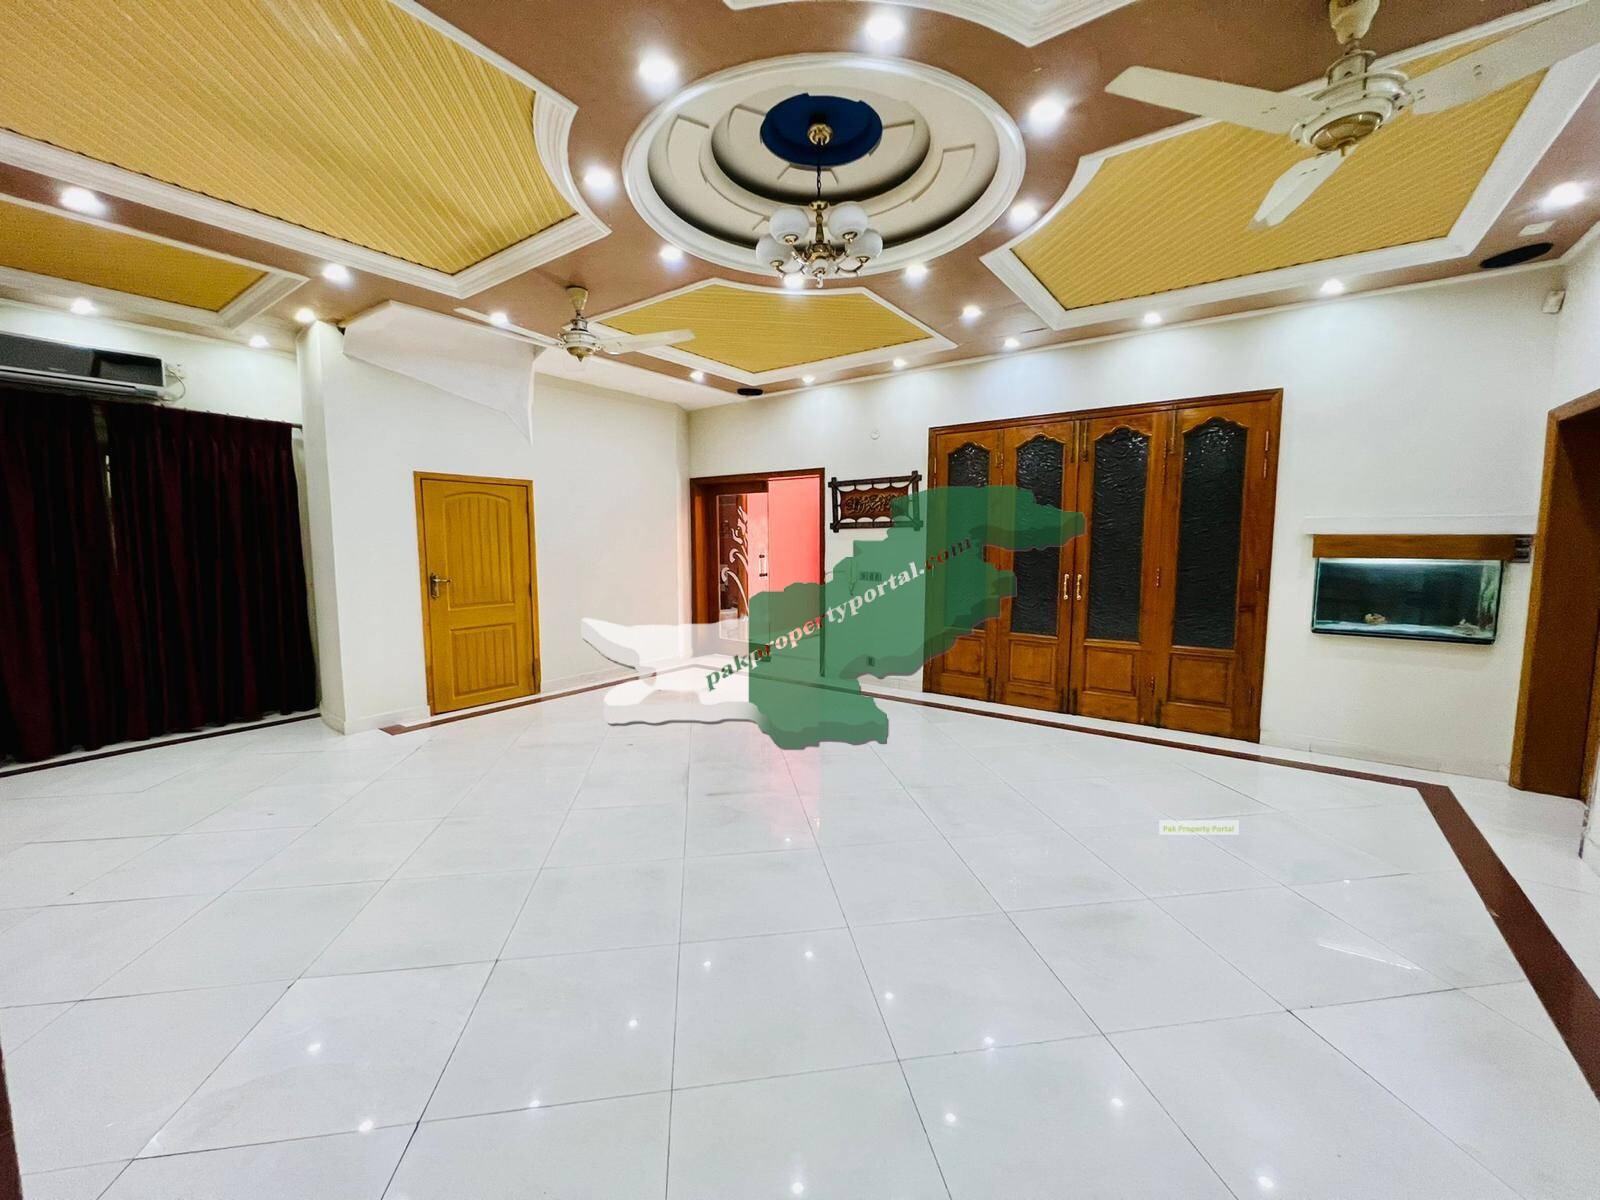 21-Marla Double Unint Bungalow For Sale in PAF Officer's Colony Oppostie Askari-09 Zarrar Shaheed Road Lahore